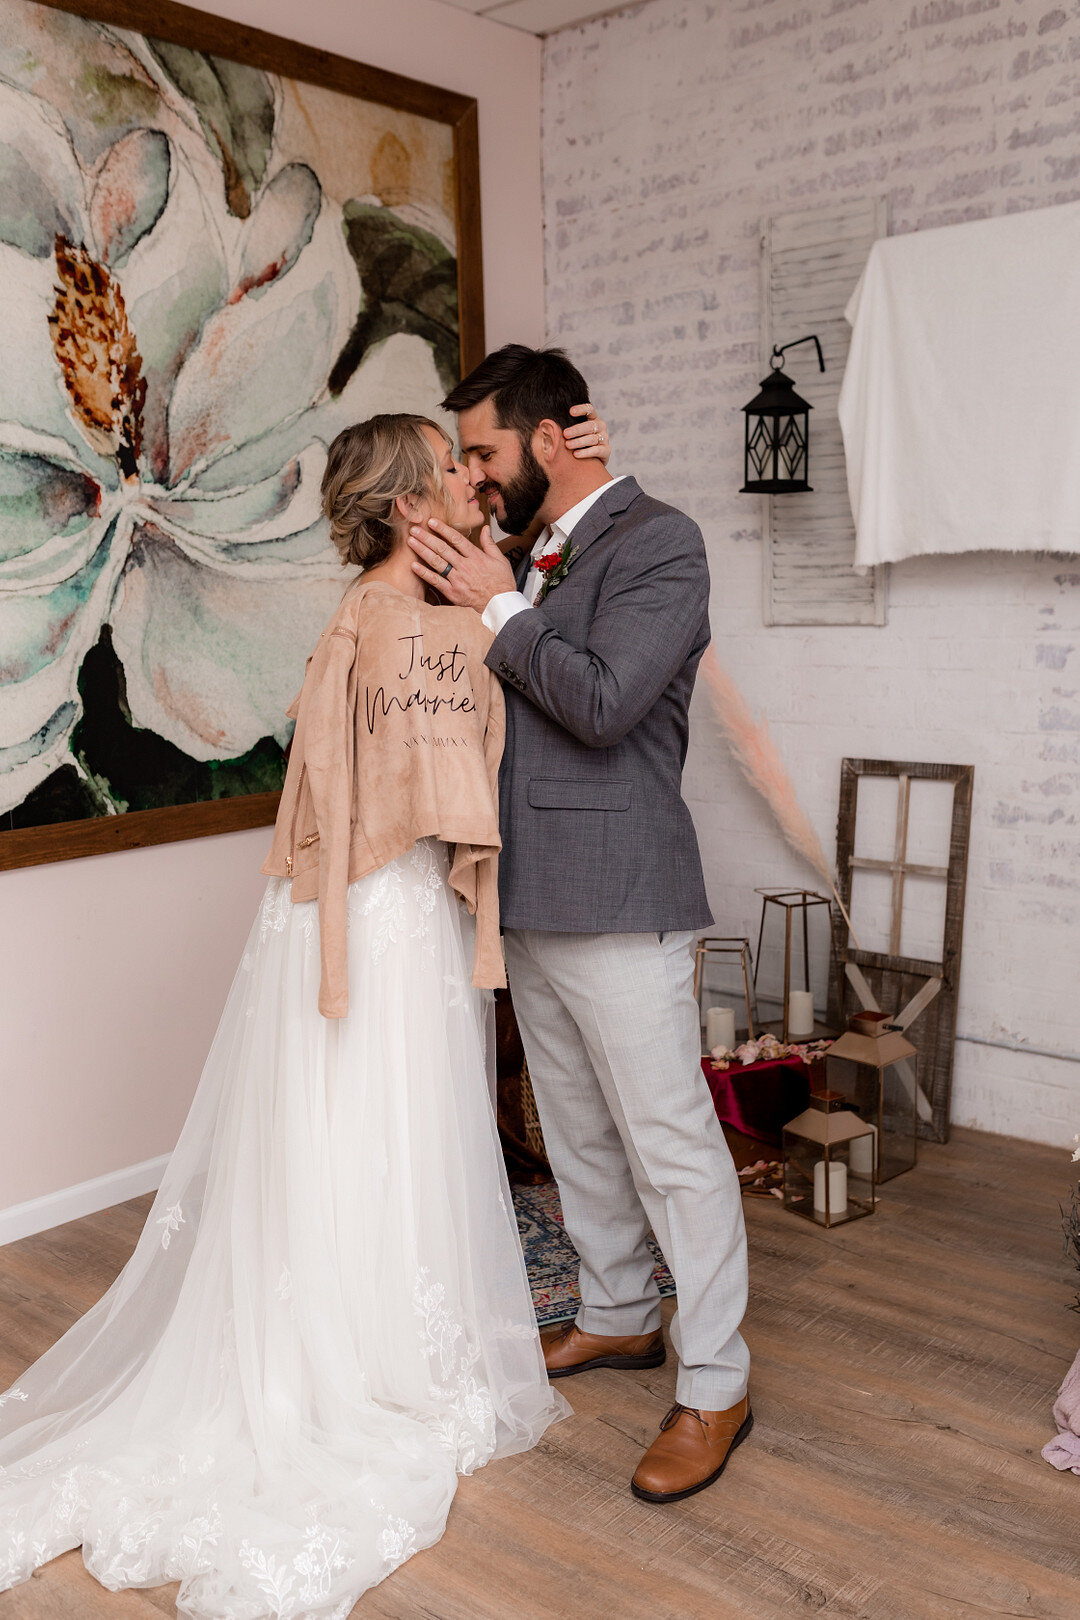 Rustic Chic Chicago Wedding Inspiration | CHI thee WED